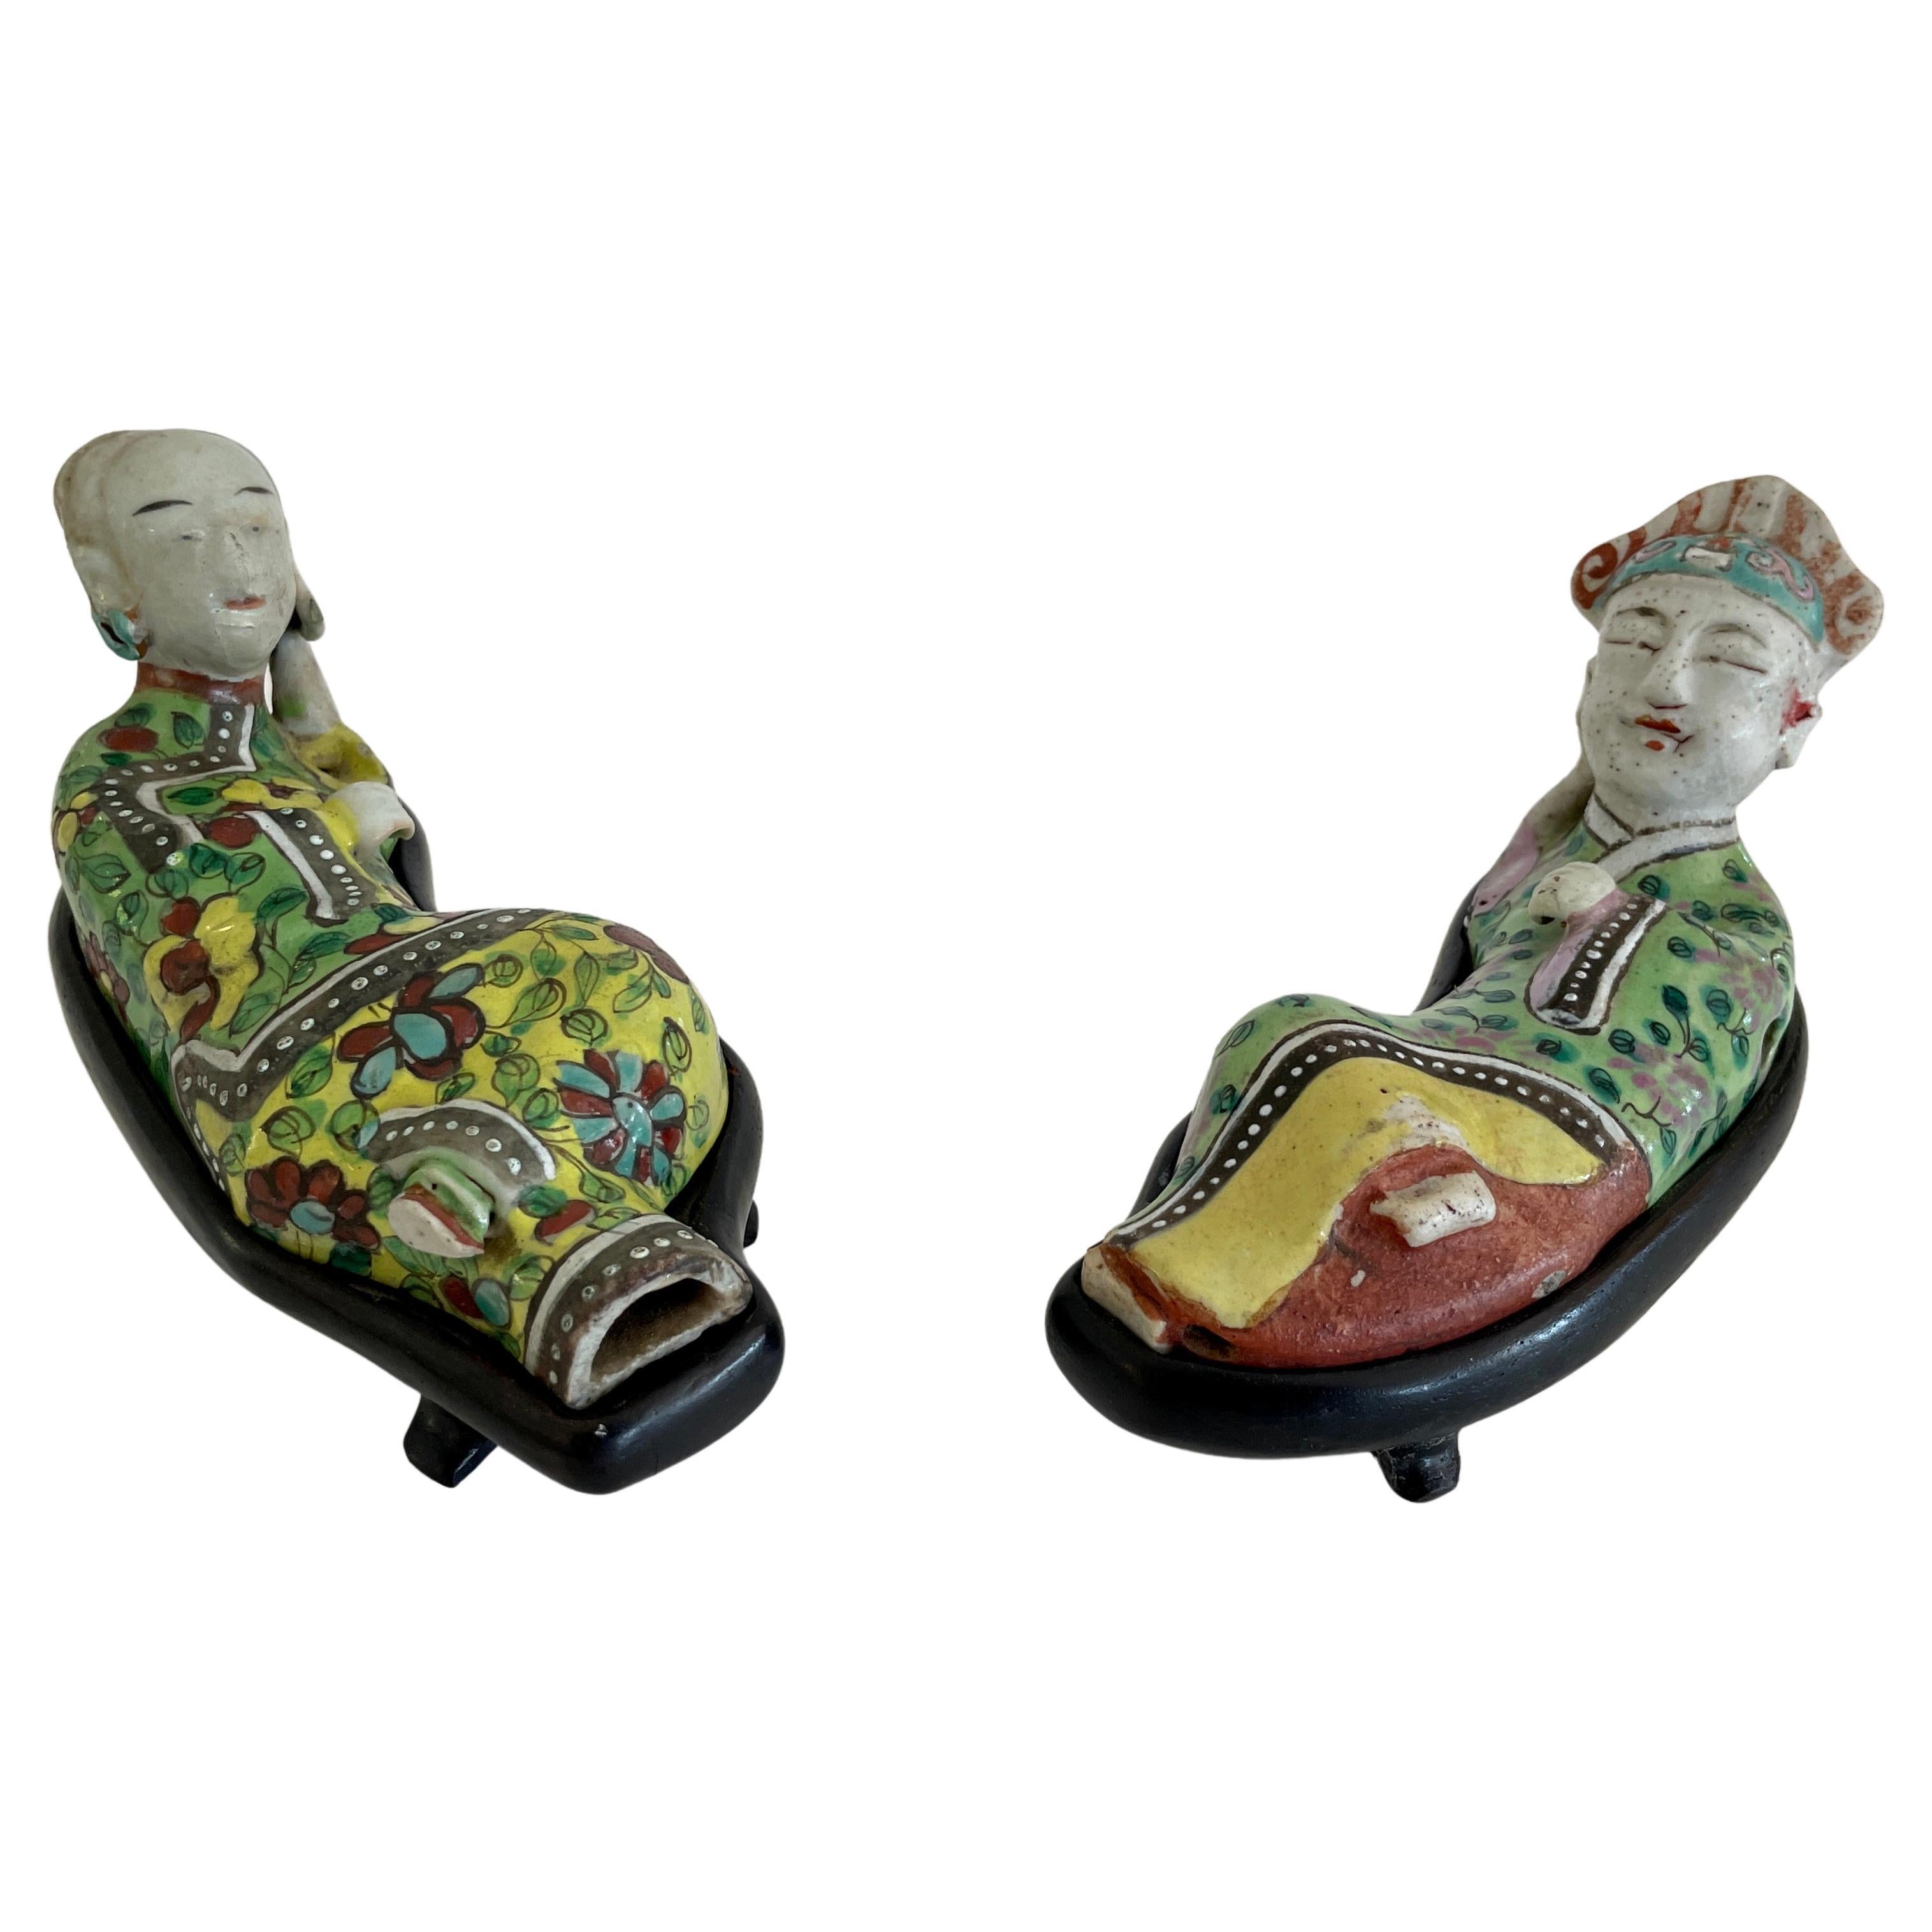 Asian Male and Female Lounging Figurines, a Pair